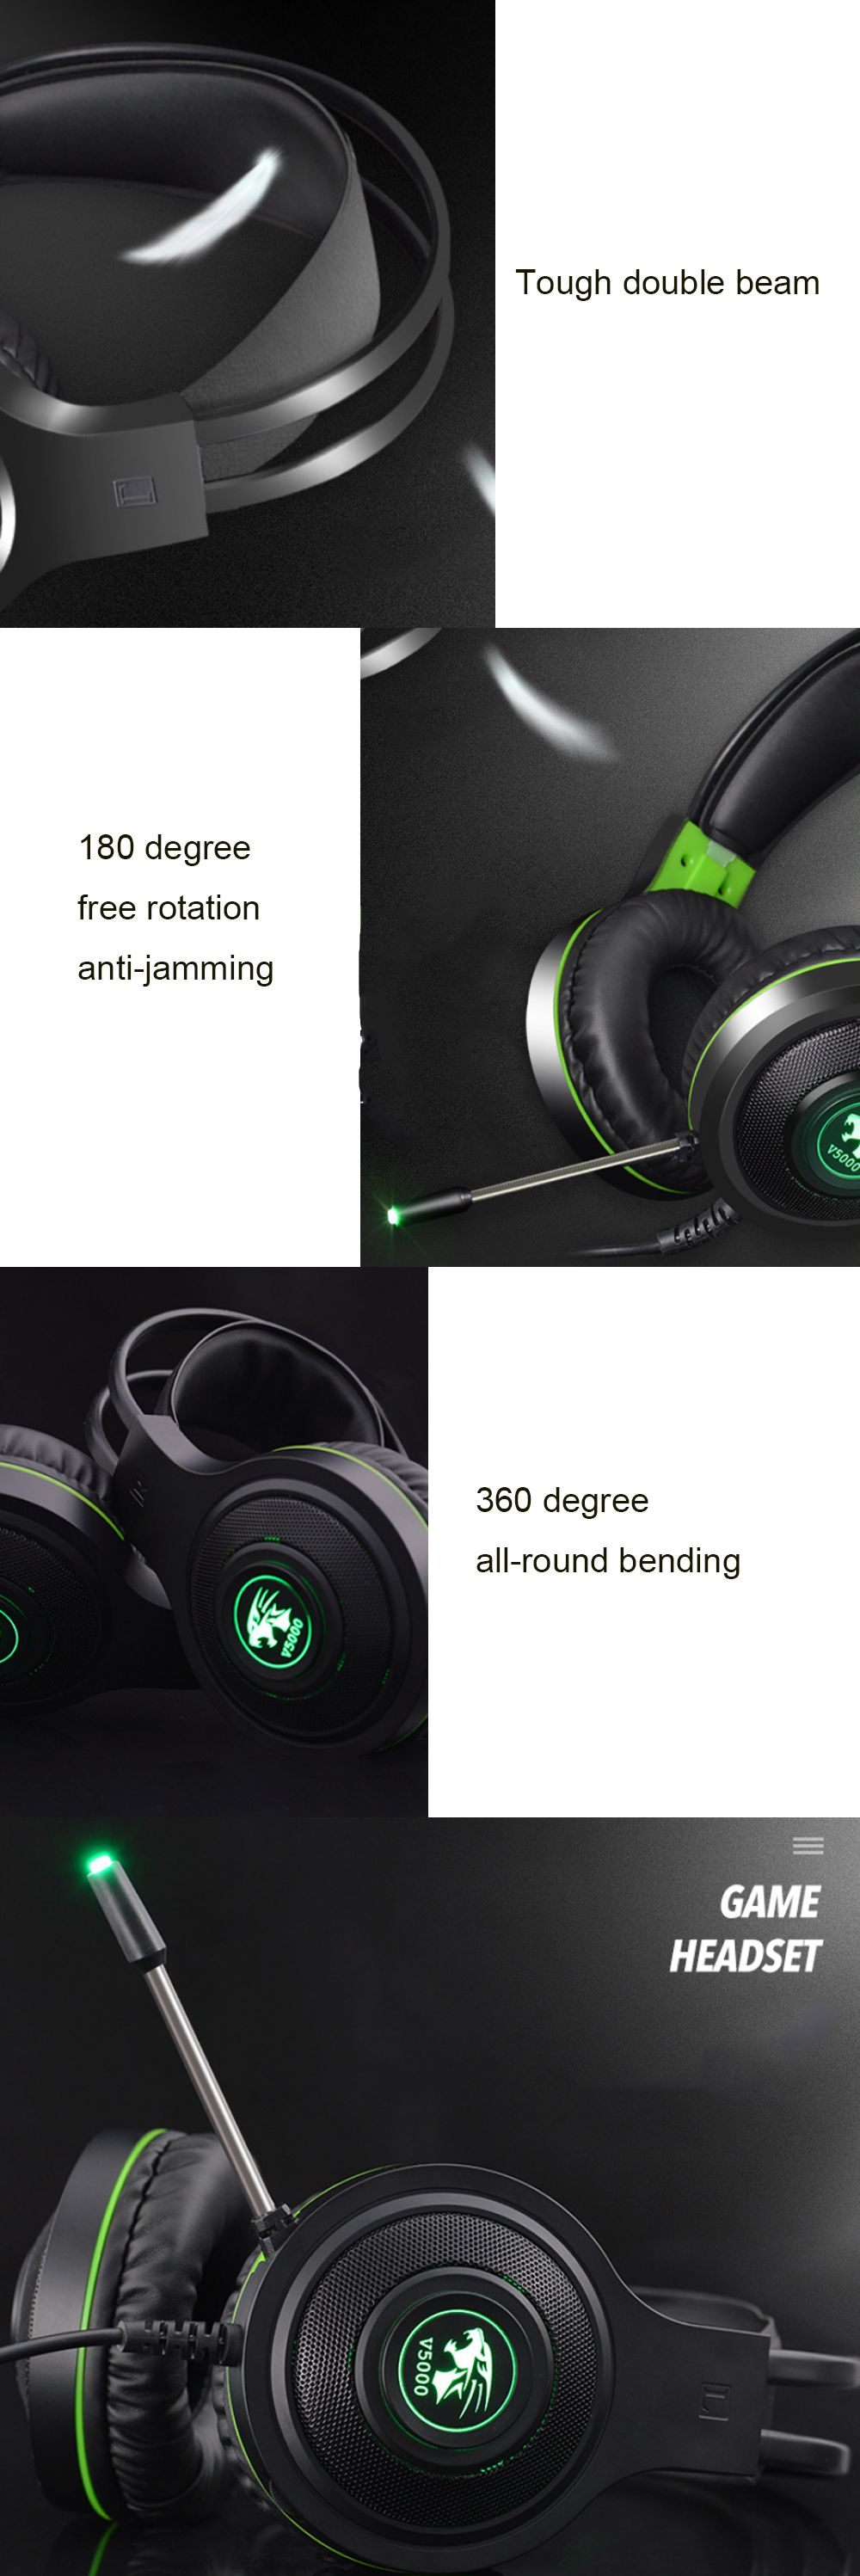 V5000-35mm-Audio-Light-Weight-Wired-Control-Headphone-with-100mm-Speaker-Unit-Gaming-Headset-for-Com-1594352